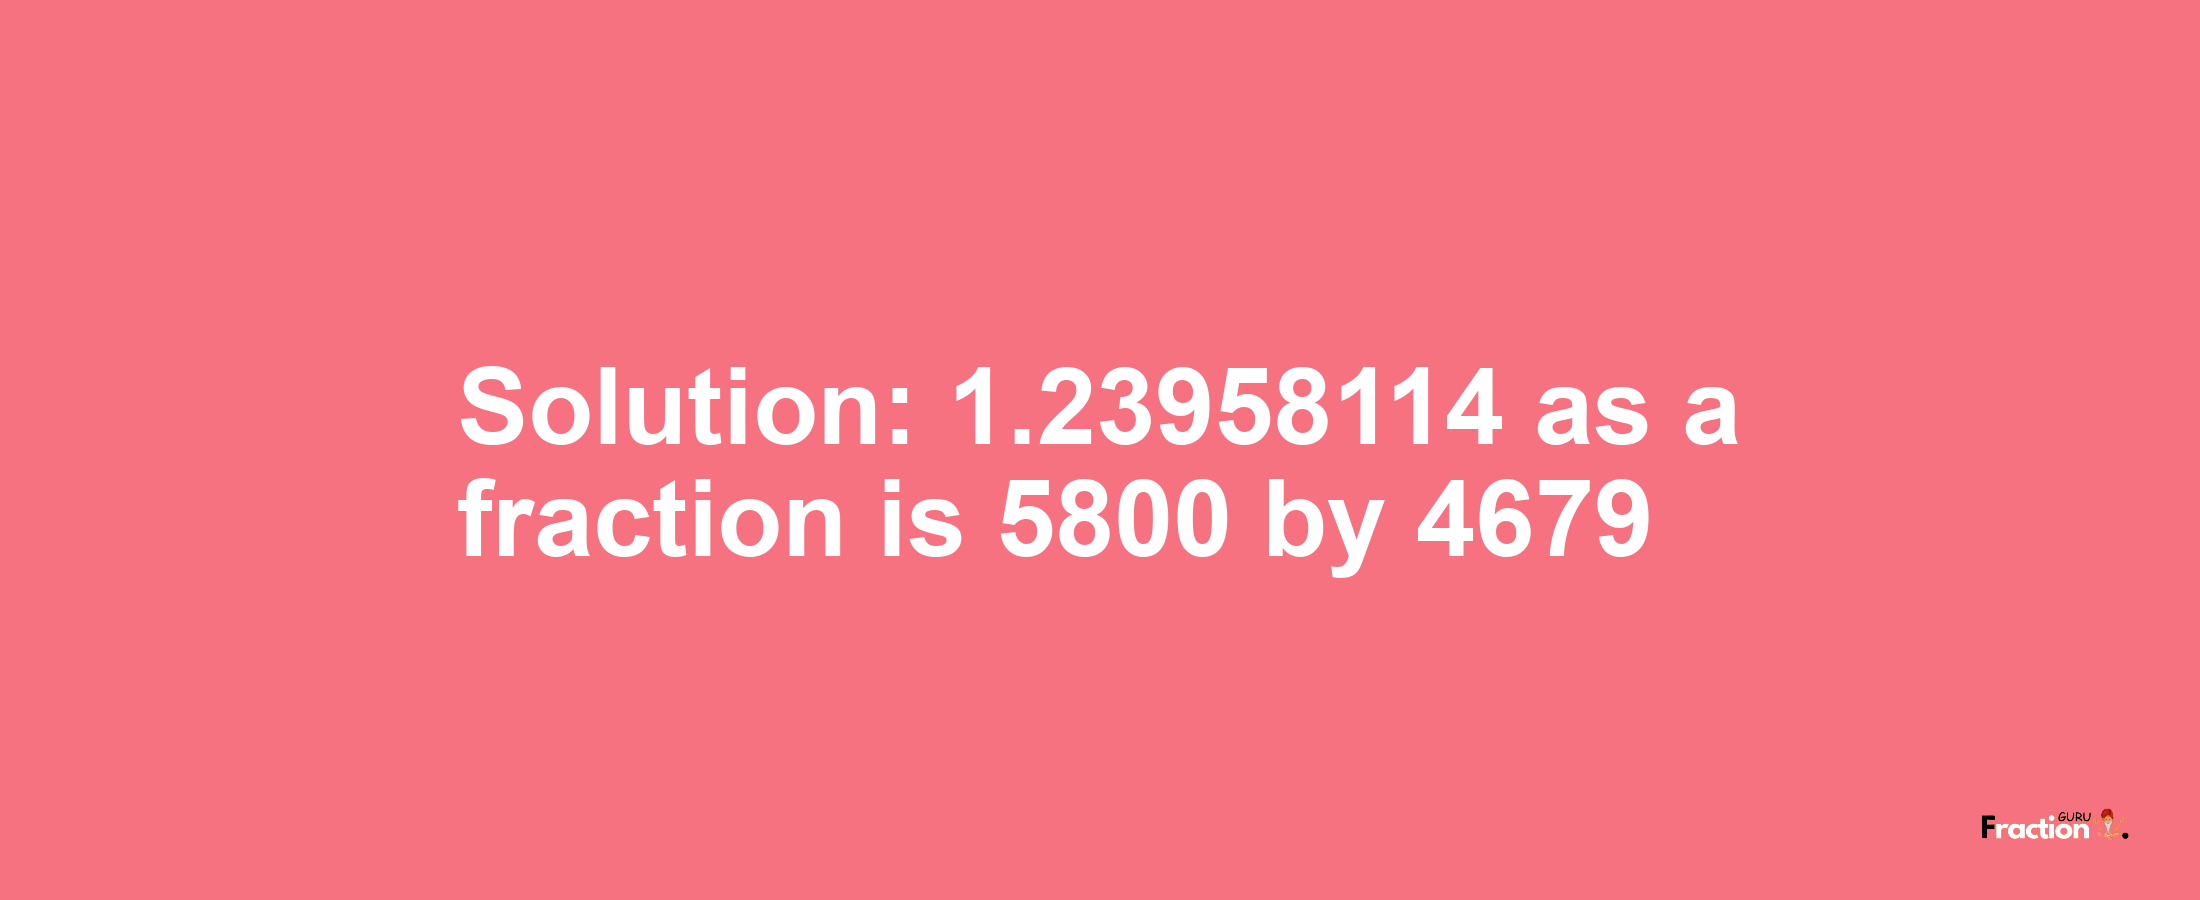 Solution:1.23958114 as a fraction is 5800/4679